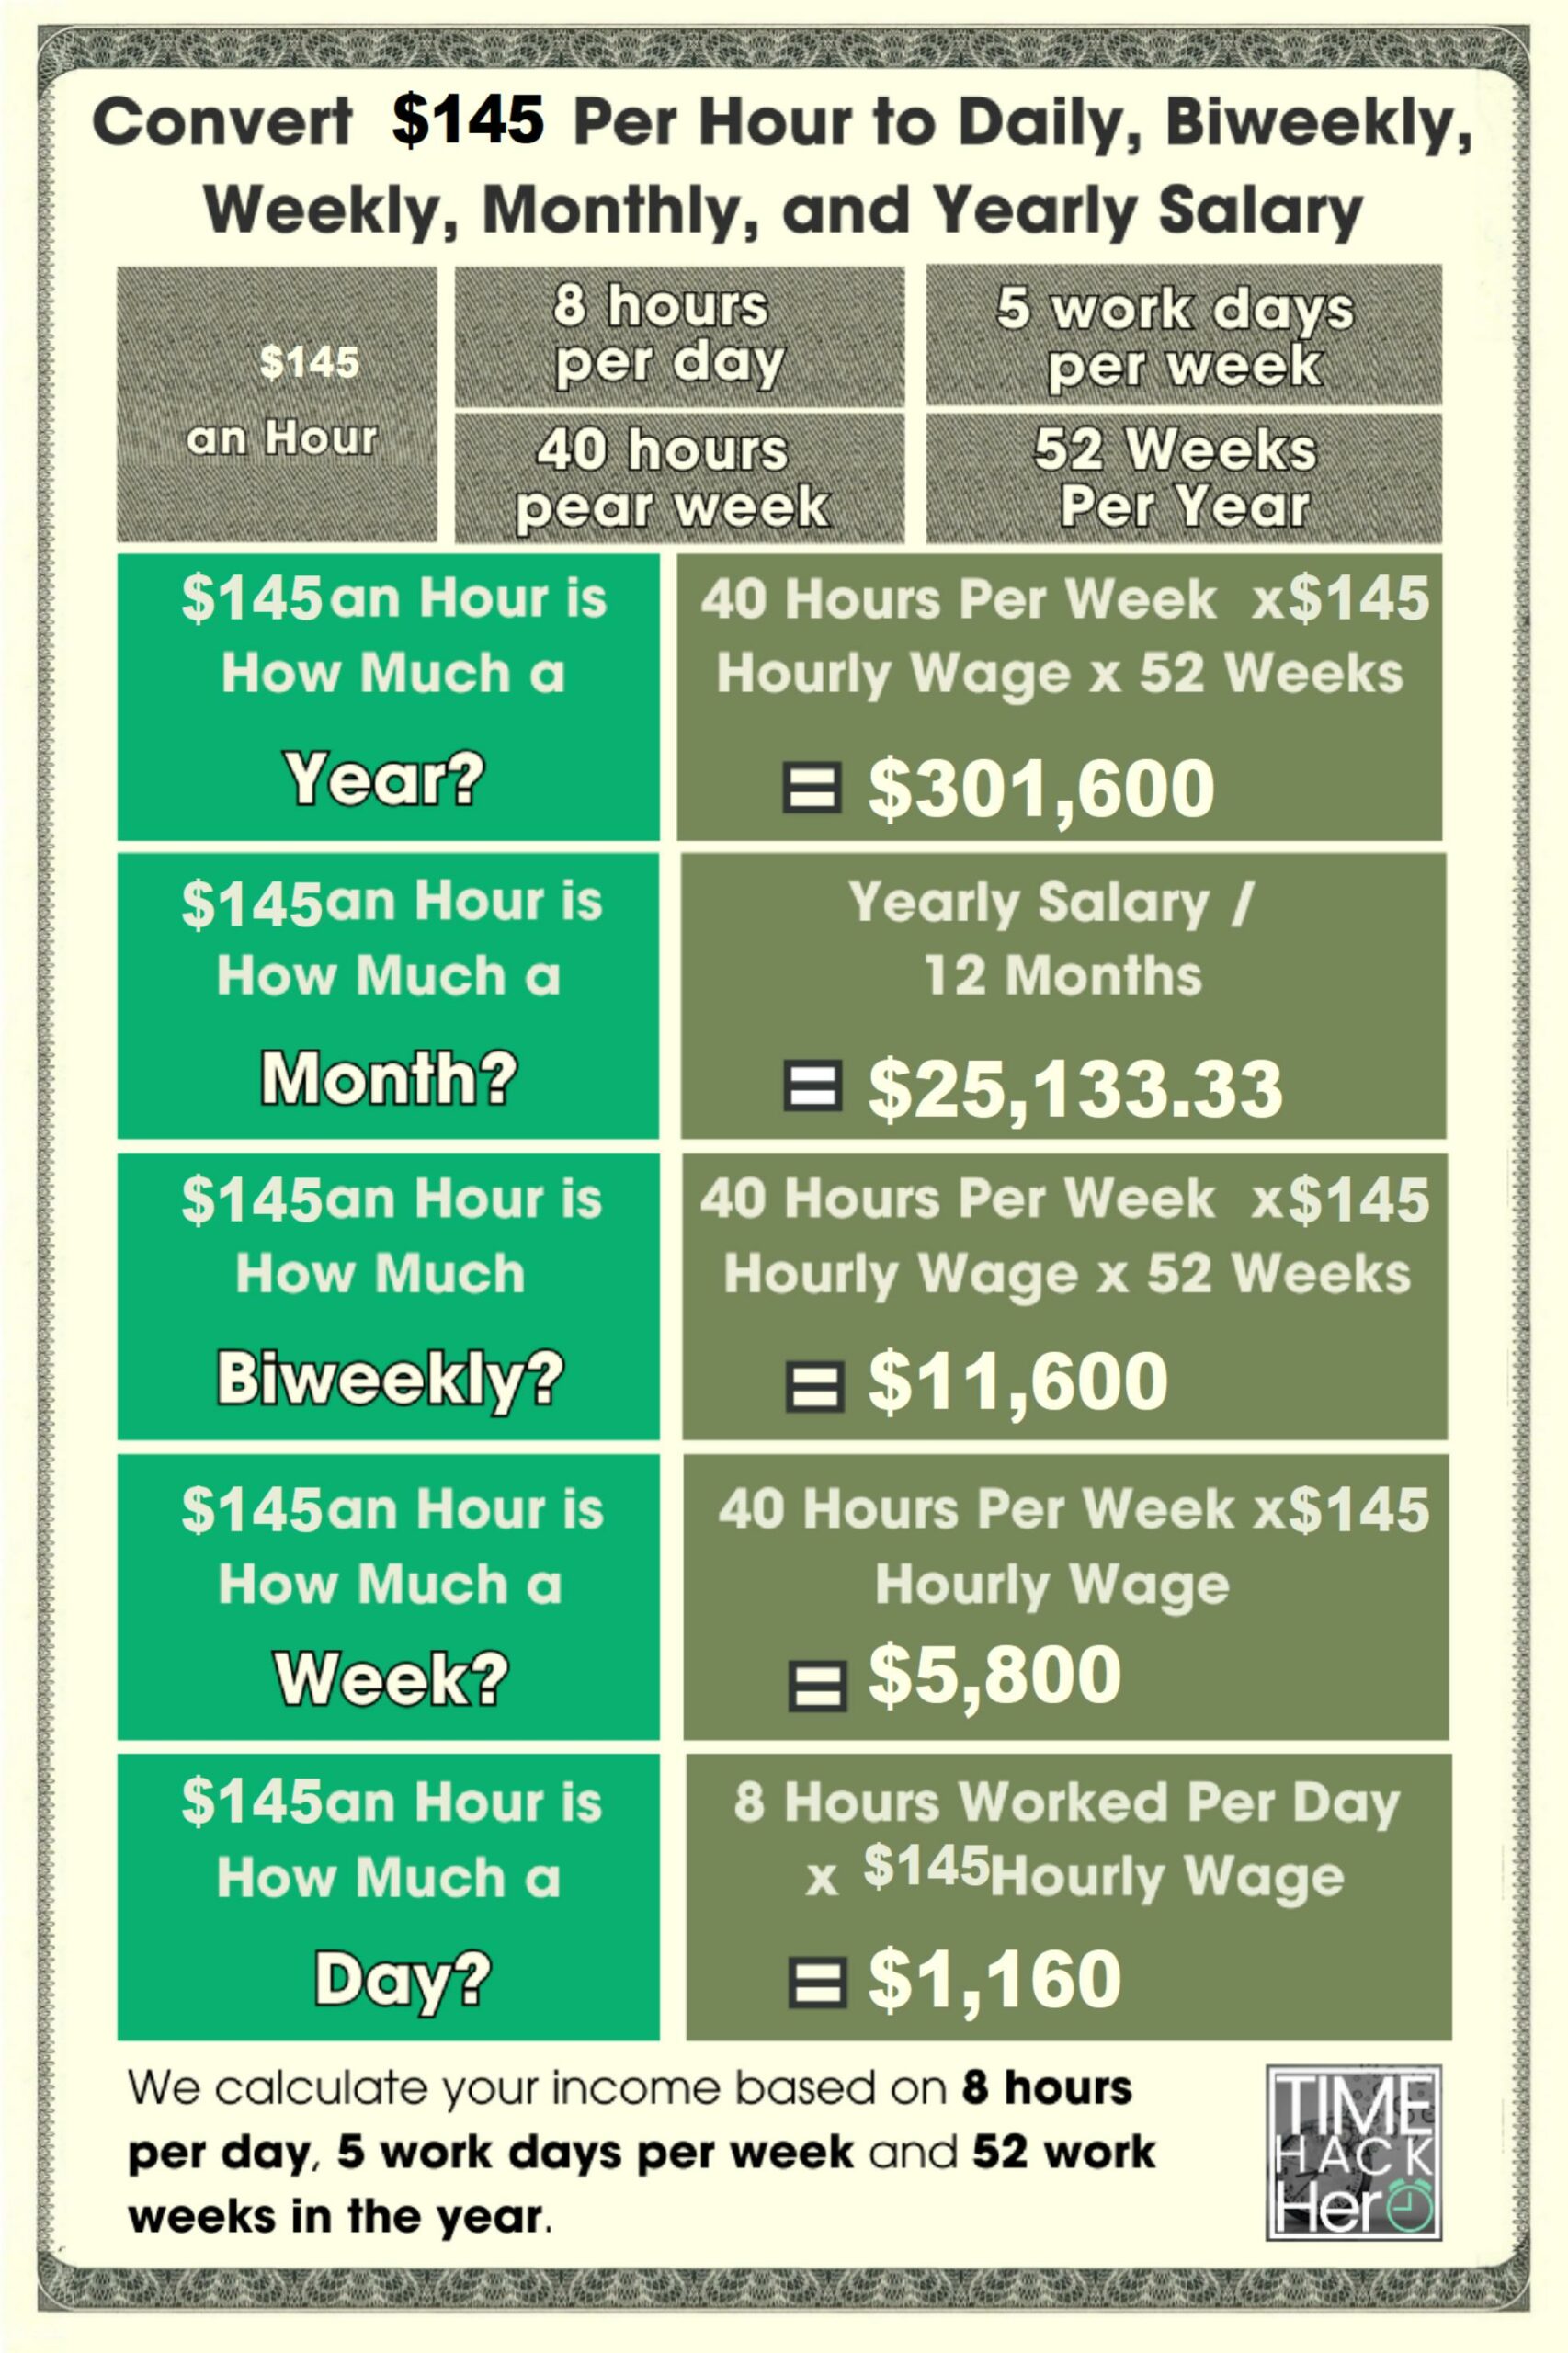 Convert $145 Per Hour to Weekly, Monthly, and Yearly Salary